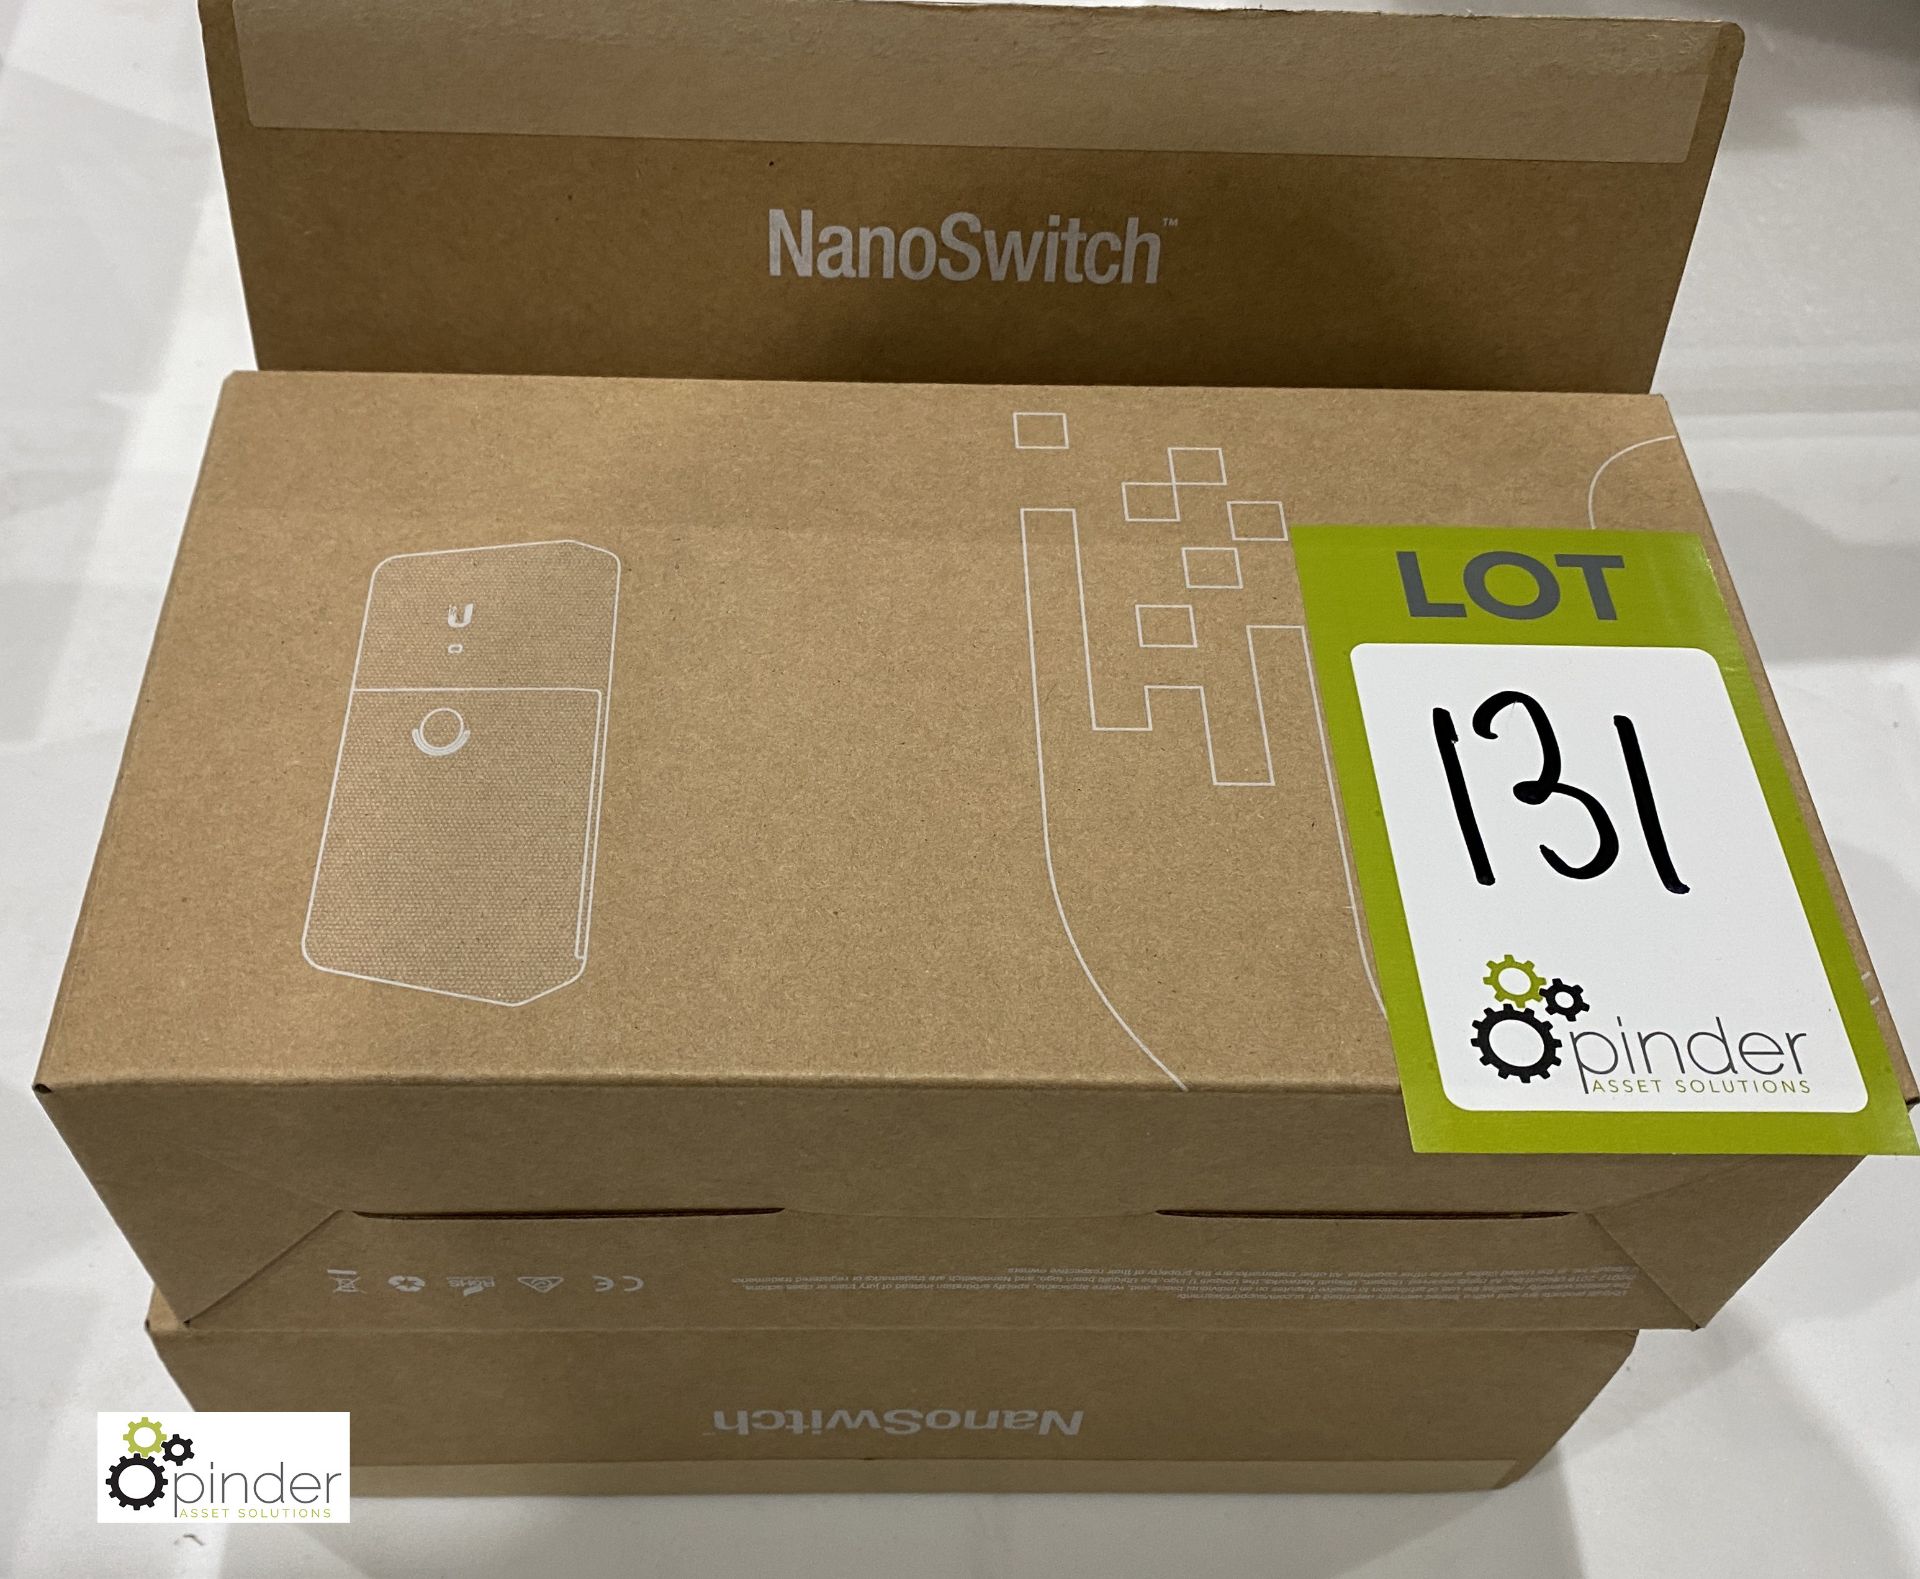 3 Unifi Nano Switches, 4-port POE past through switch, boxed and unused - Image 2 of 4